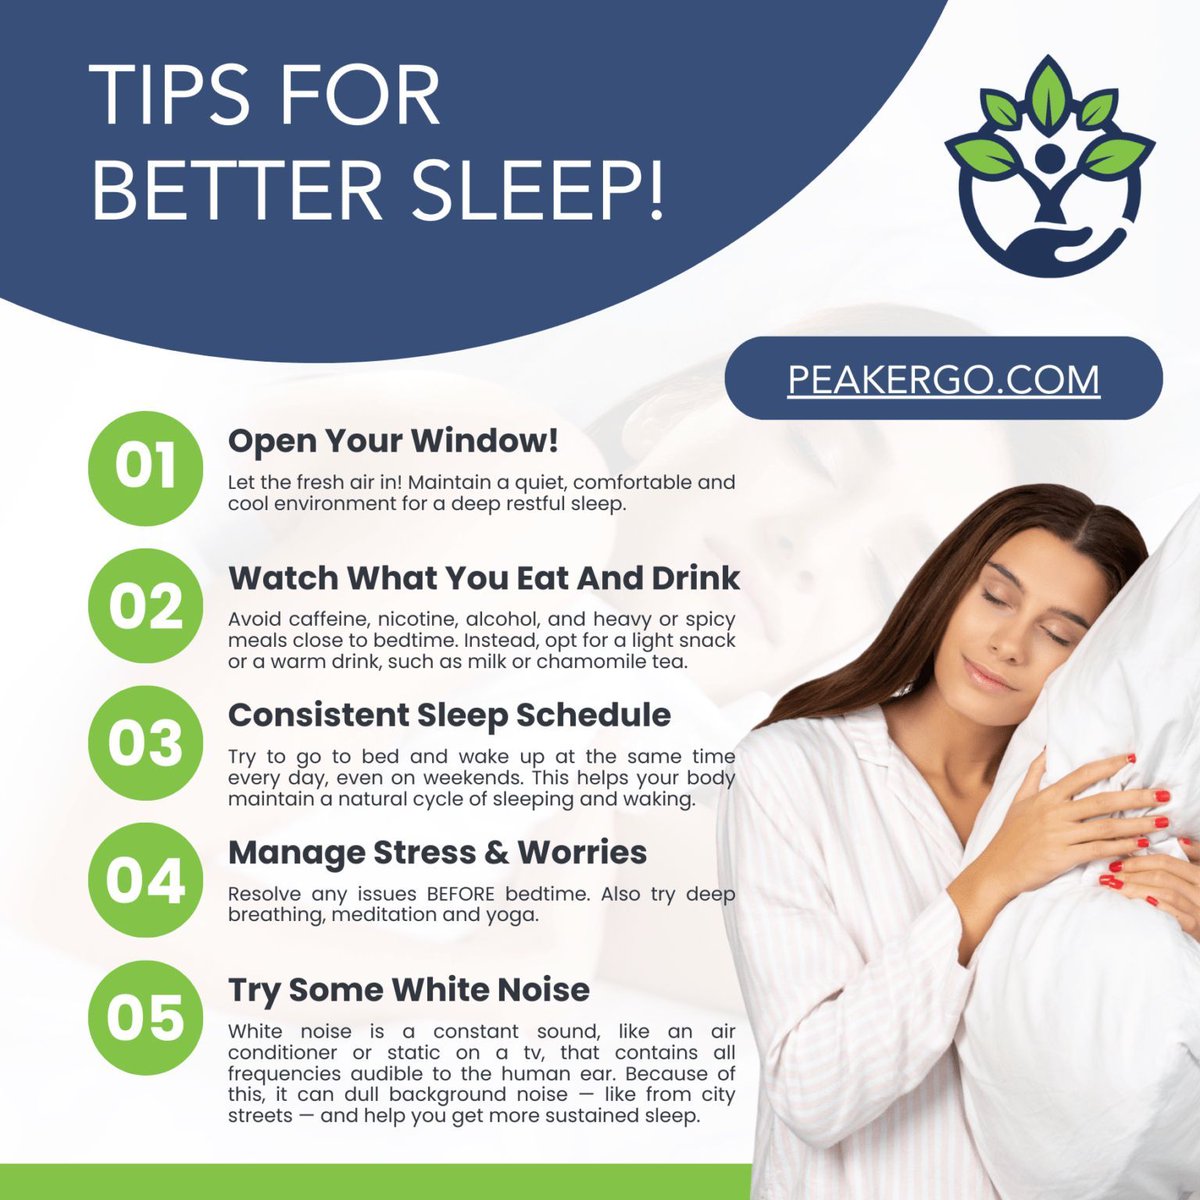 Why Do We Need to Sleep?

During deep sleep, tissues are repaired, growth hormones are released, and your immune system gets a boost, contributing to overall wellness.

buff.ly/3QJSlq8

#BetterSleep
#Insomnia
#SleepDisorders